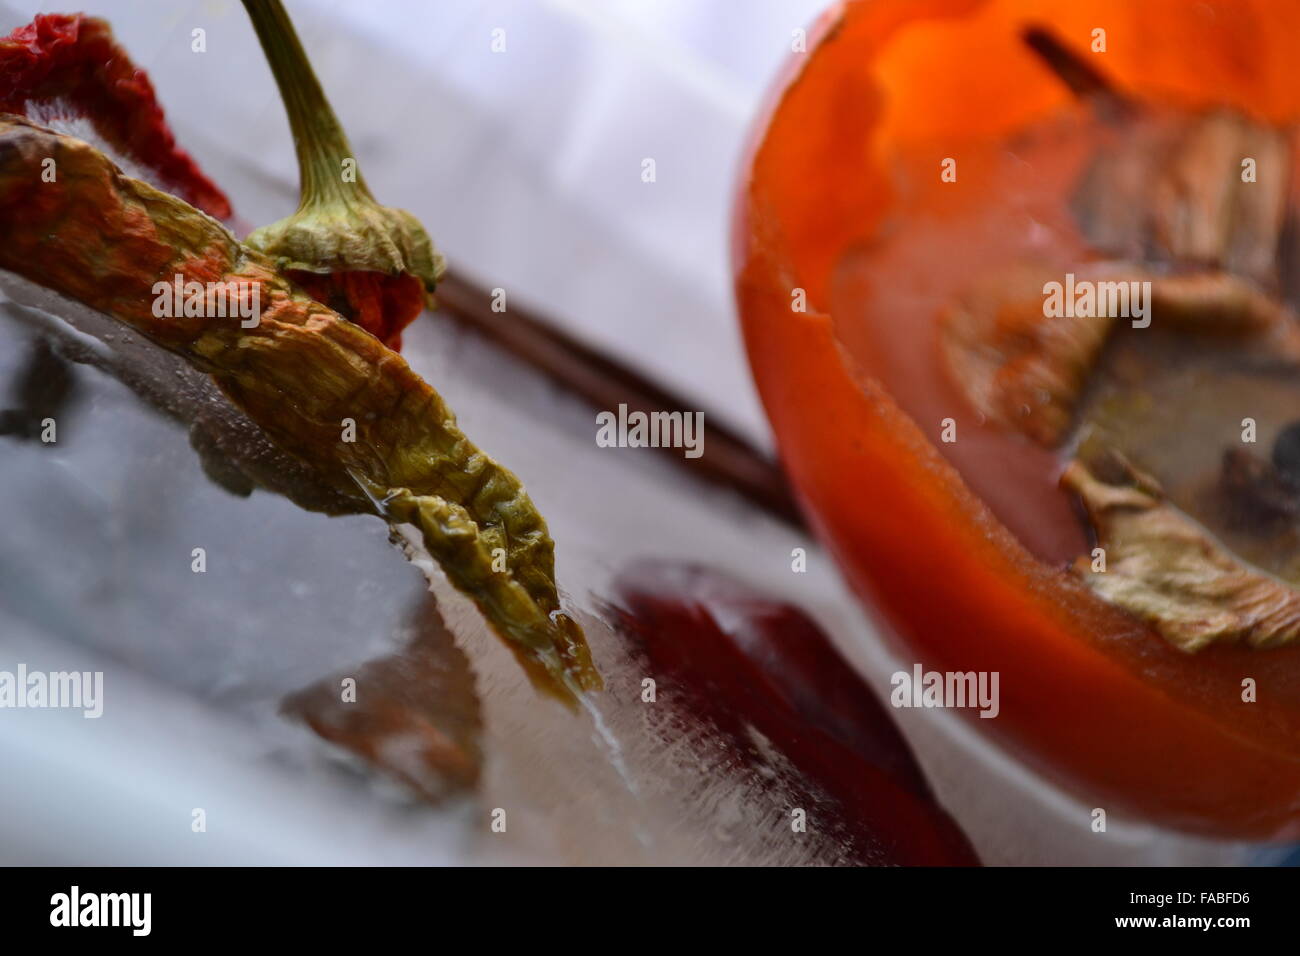 Frozen  peppers persimmon  in melting ice Stock Photo